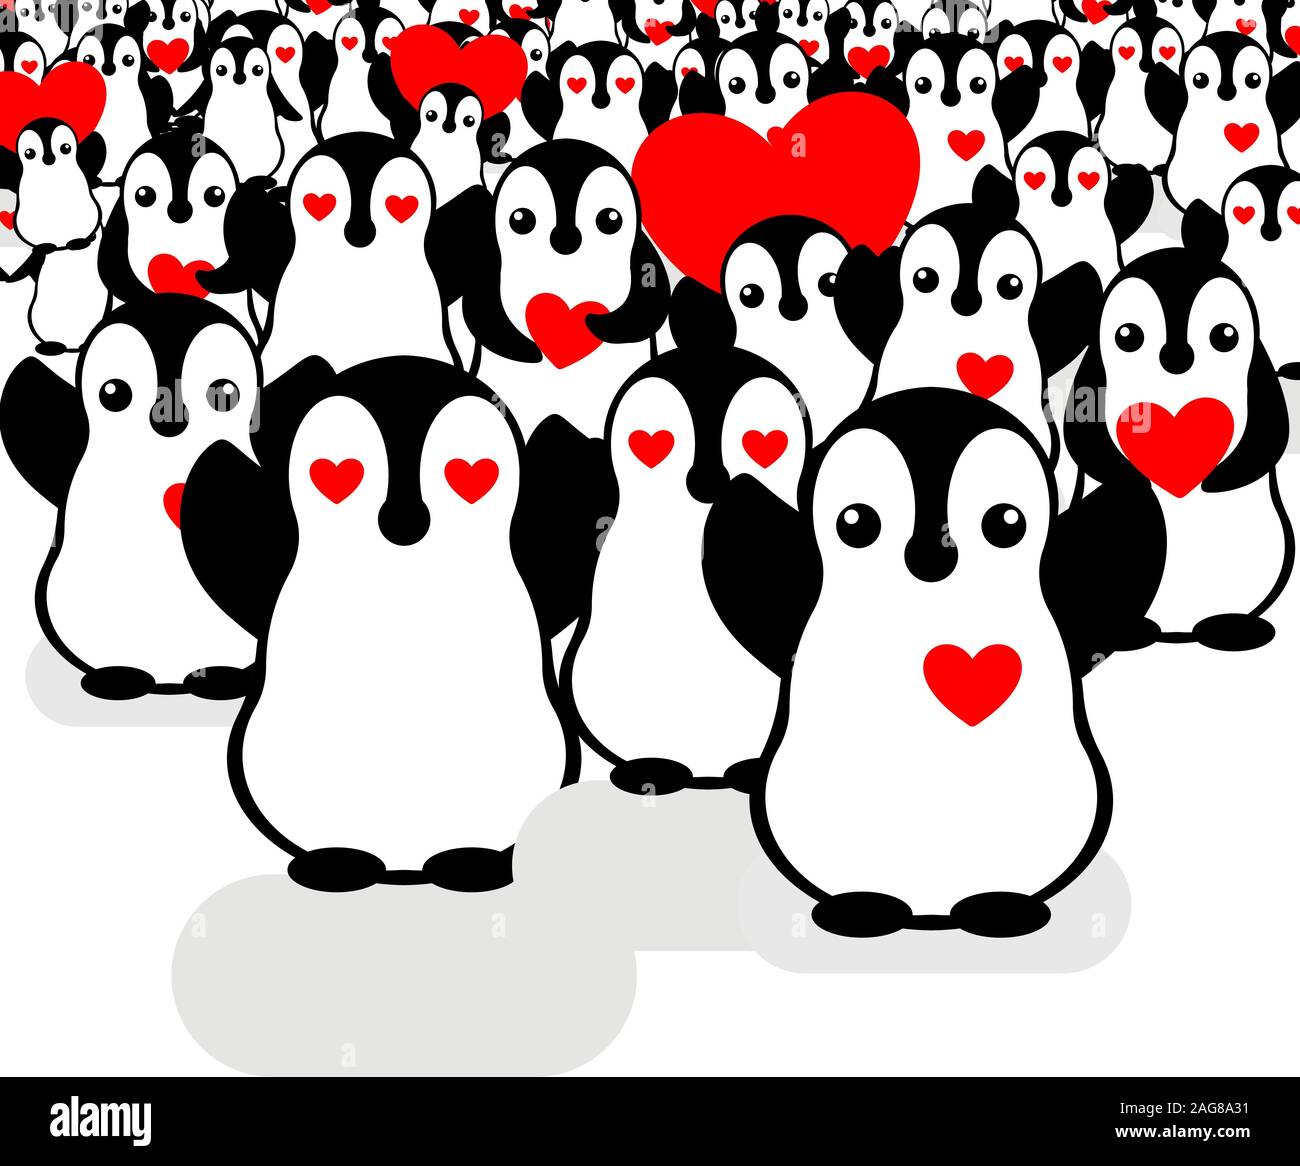 Vector penguin heart icons. Loving crowd of penguins. Fans at the concert. Likes and followers. Stock Vector